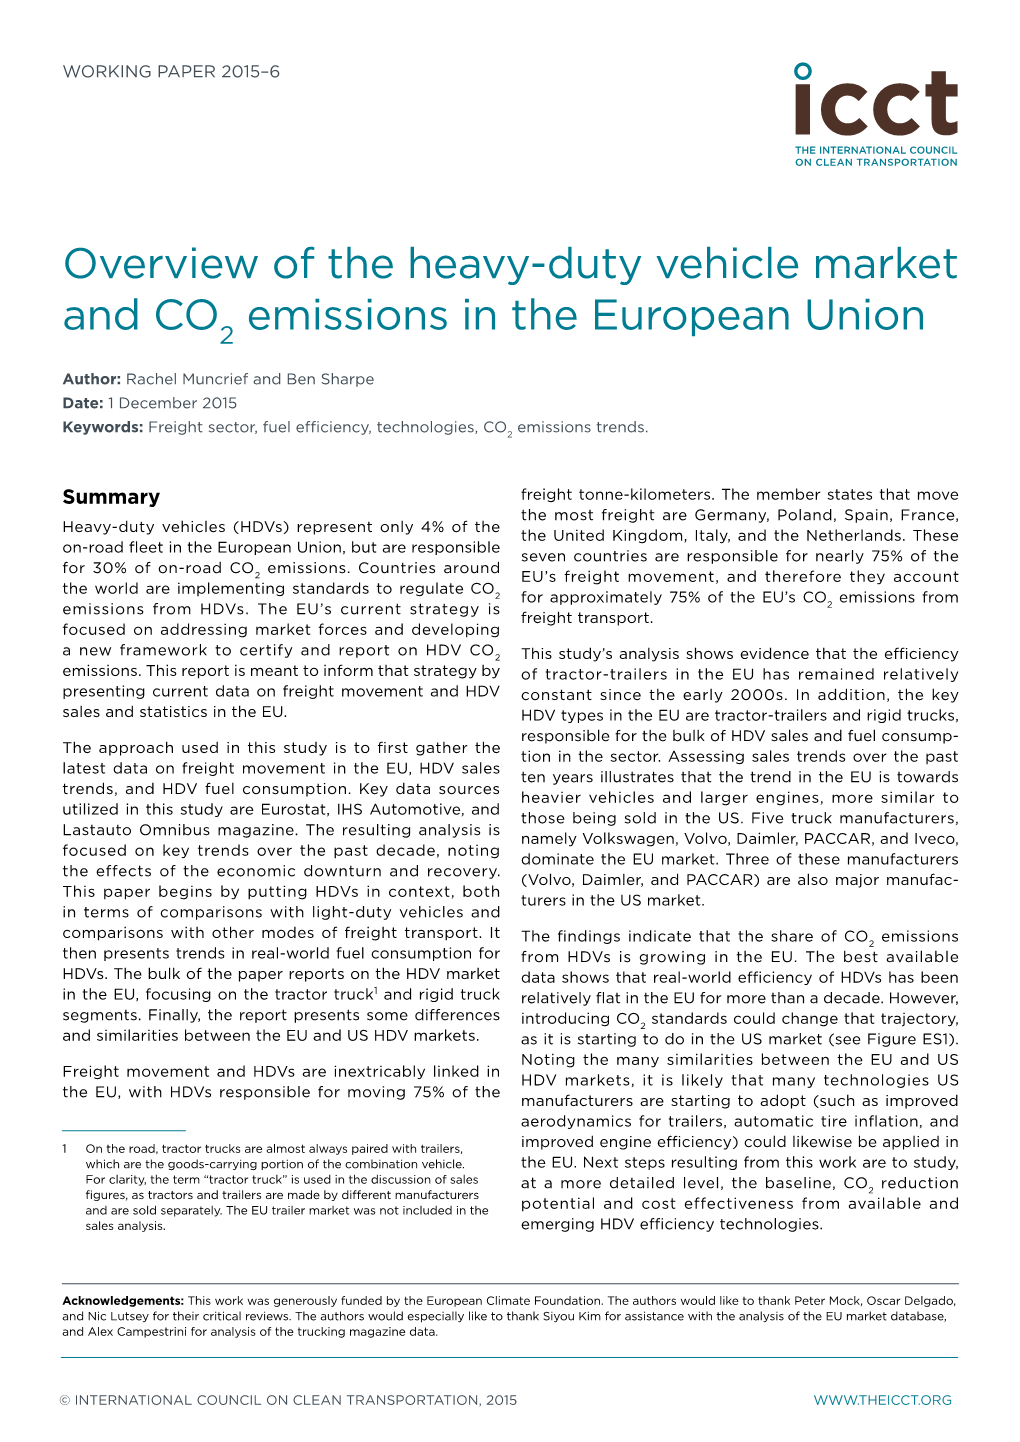 Overview of the Heavy-Duty Vehicle Market and CO2 Emissions in the European Union